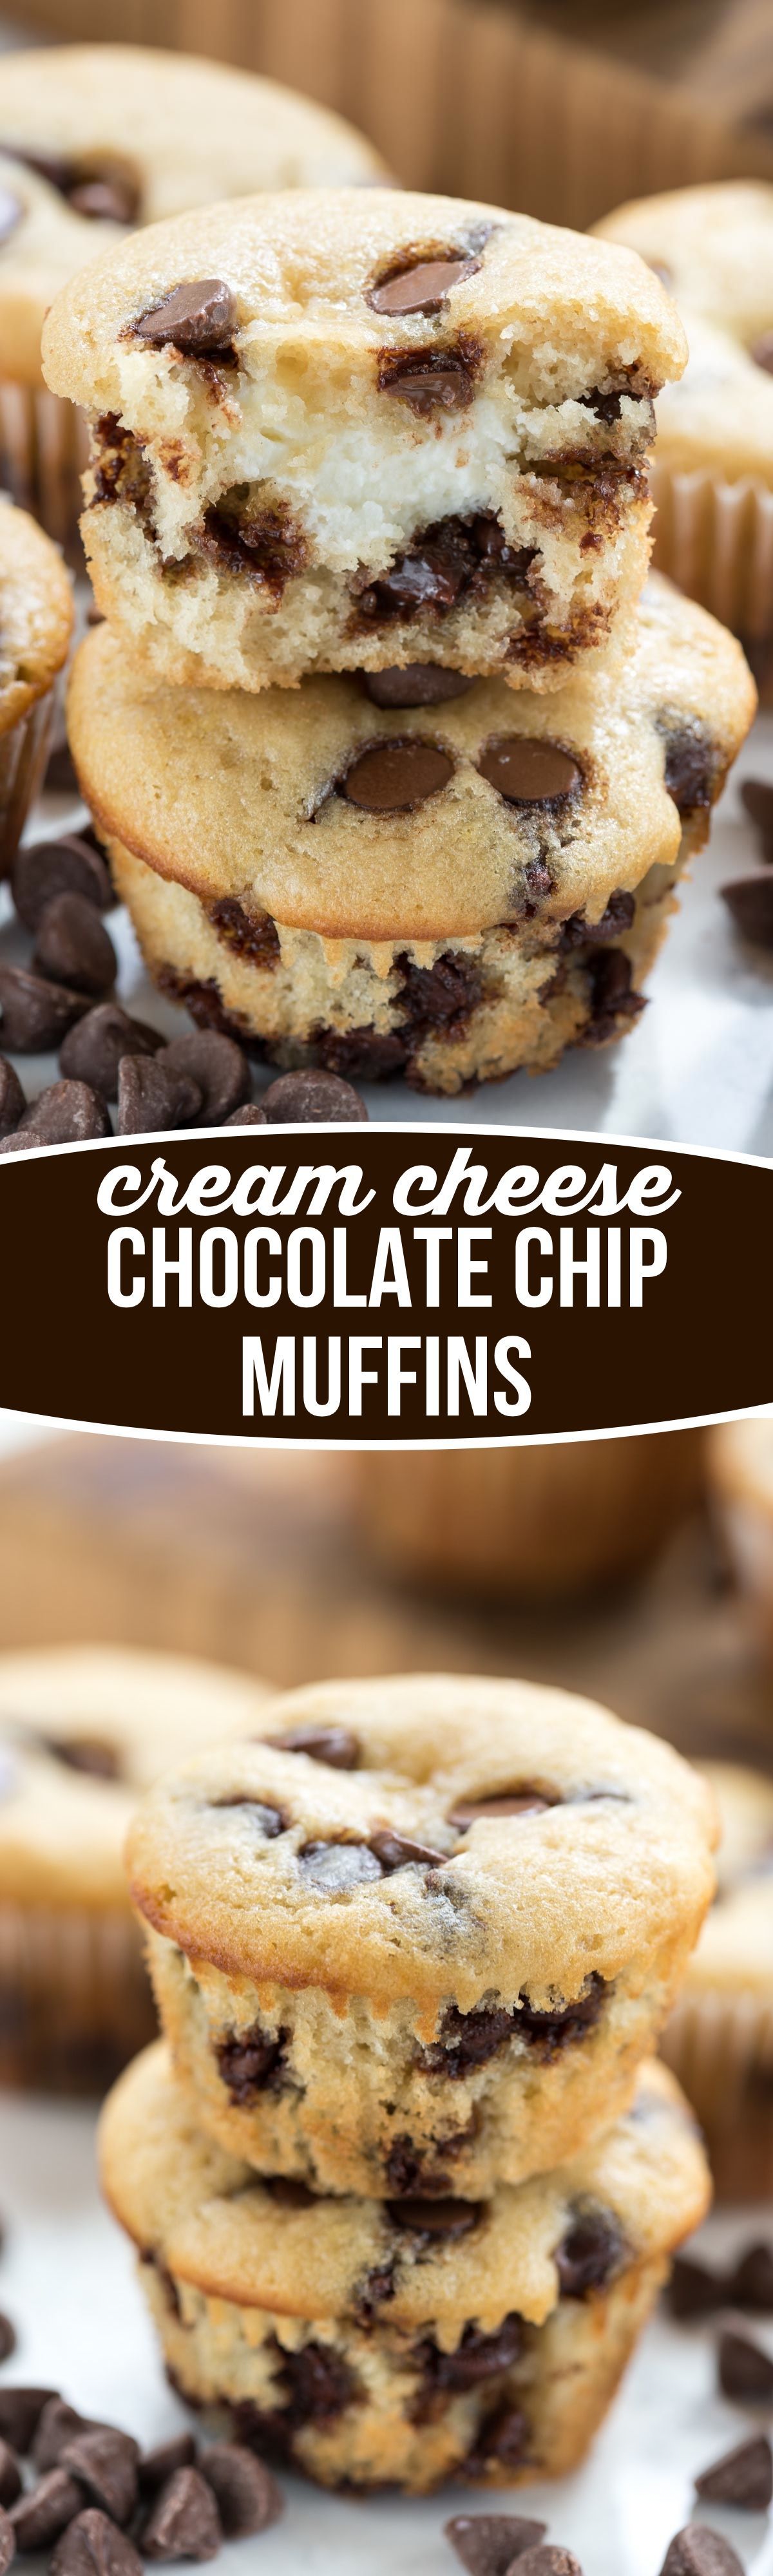 Cream Cheese filled Chocolate Chip Muffins – this easy muffin recipe is filled with chocolate chips an